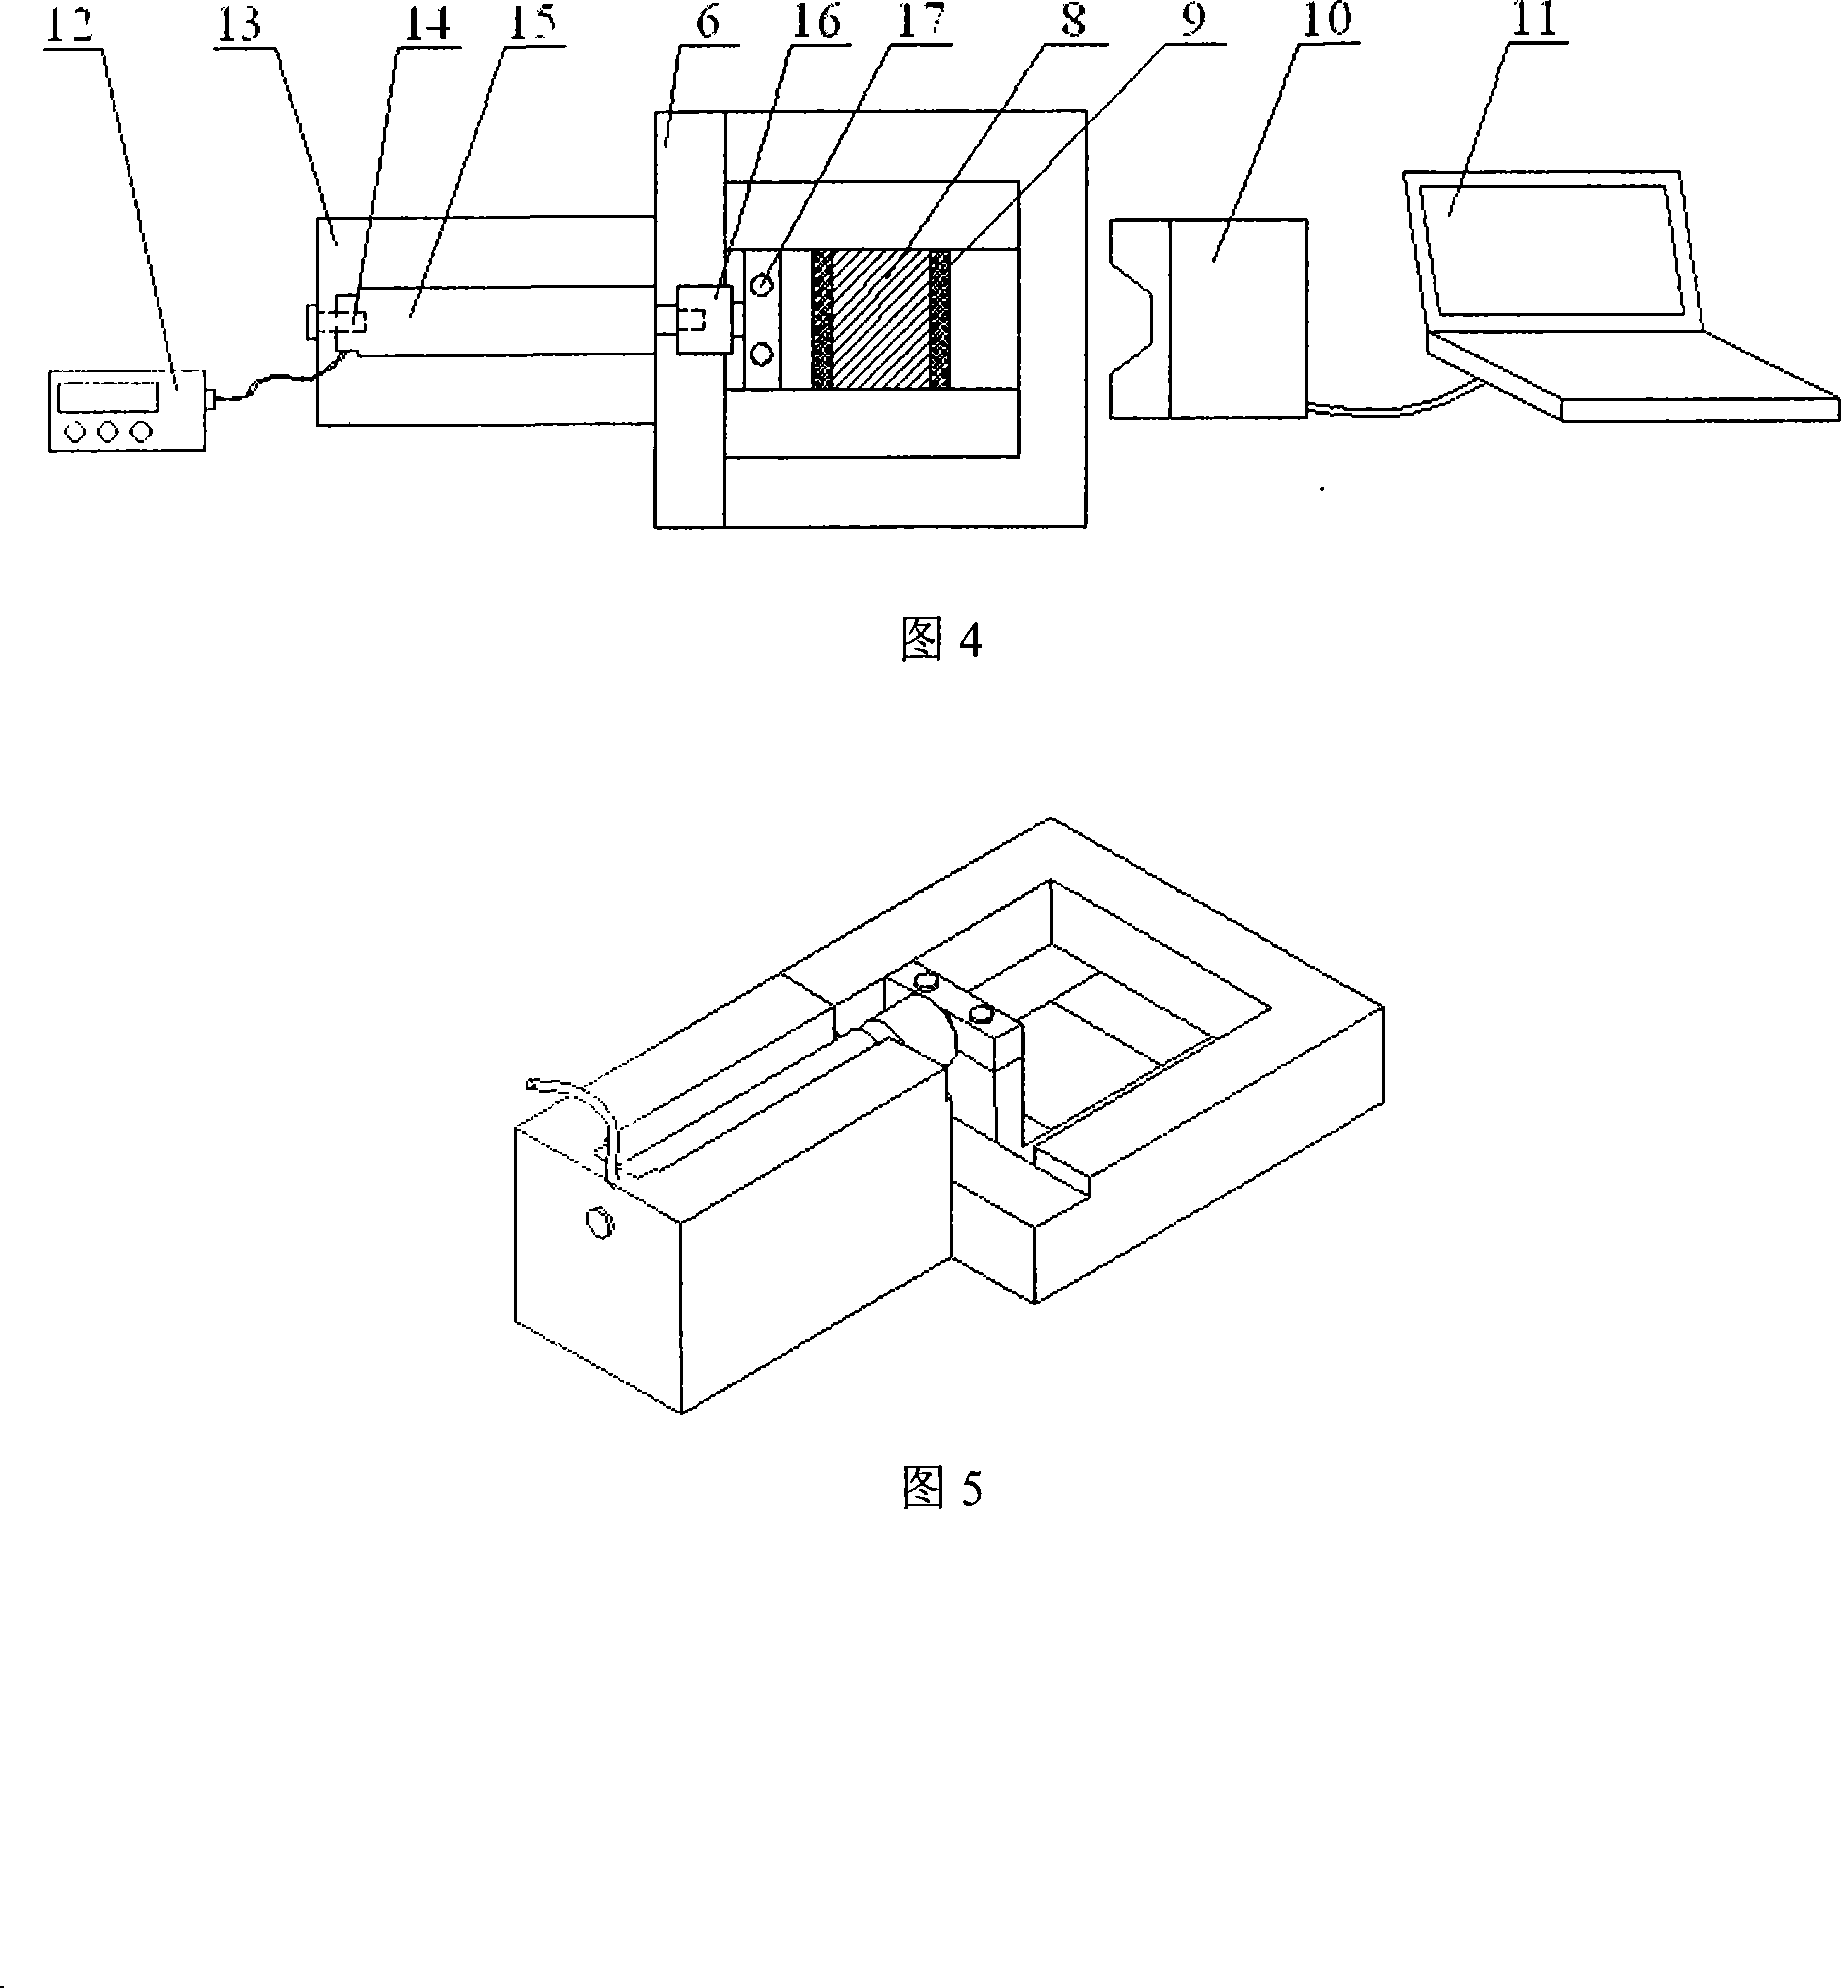 Cell strain loading device under three-dimensional cultivation condition